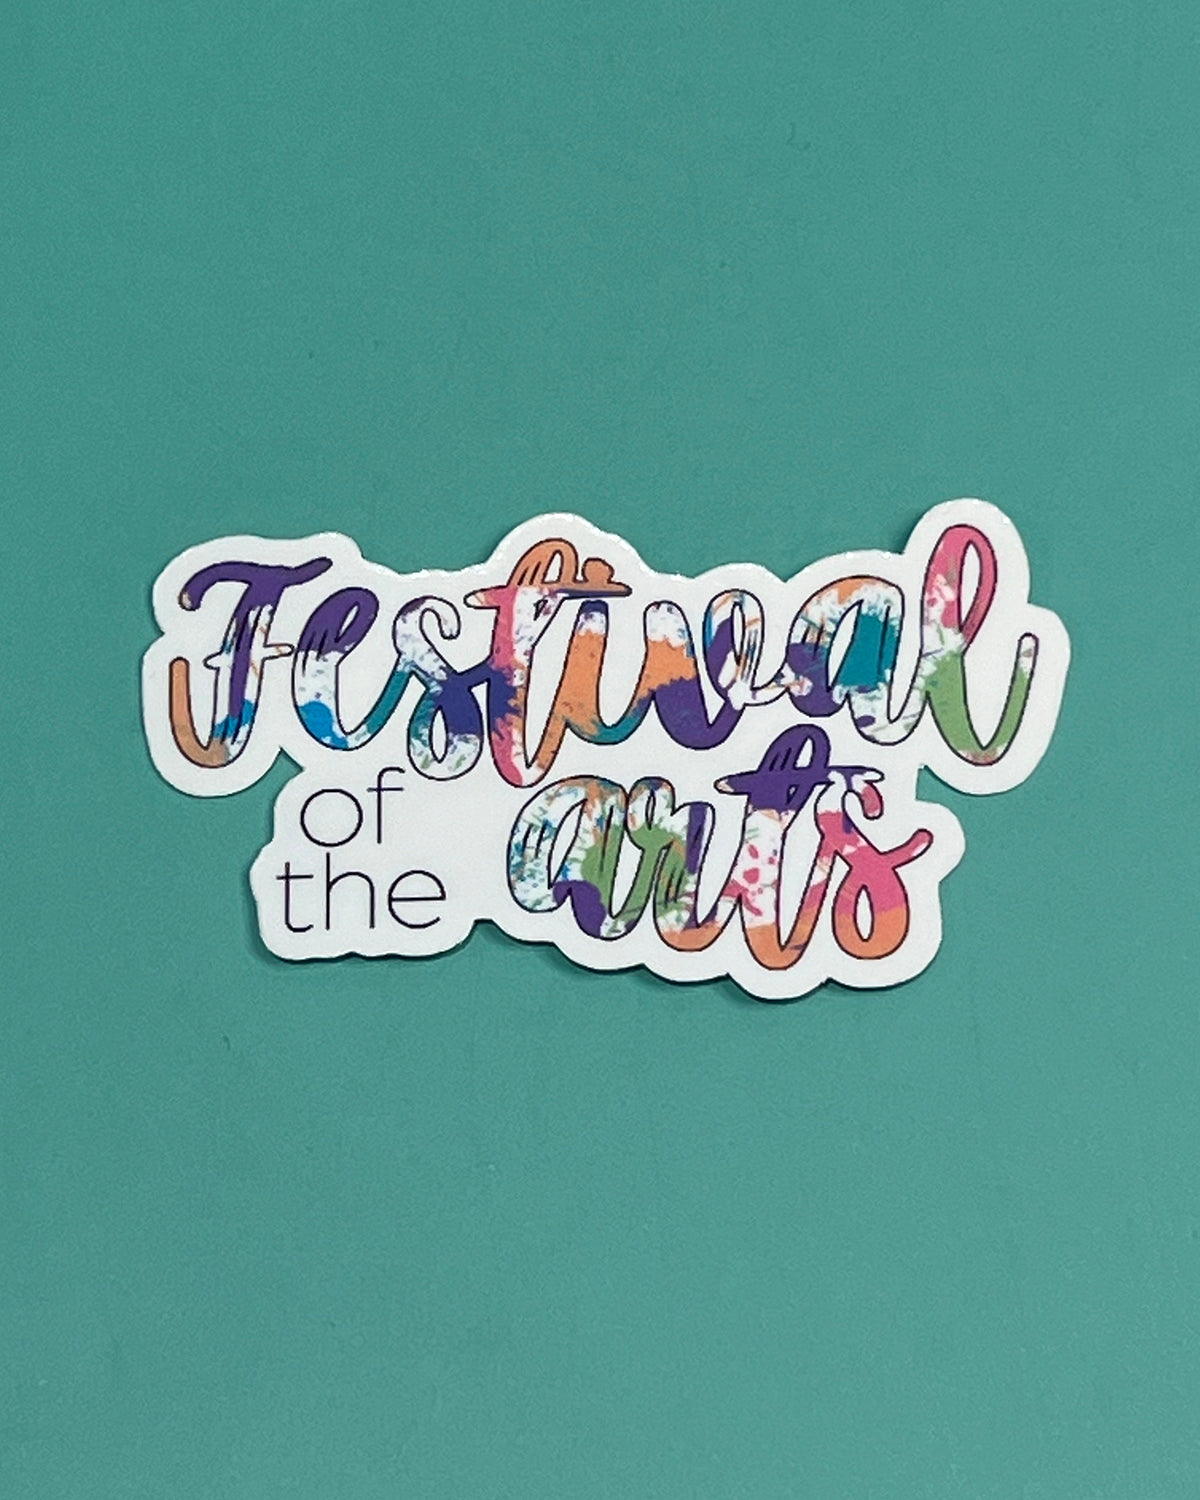 Festival of the Arts Waterproof Sticker  - EPCOT Inspired